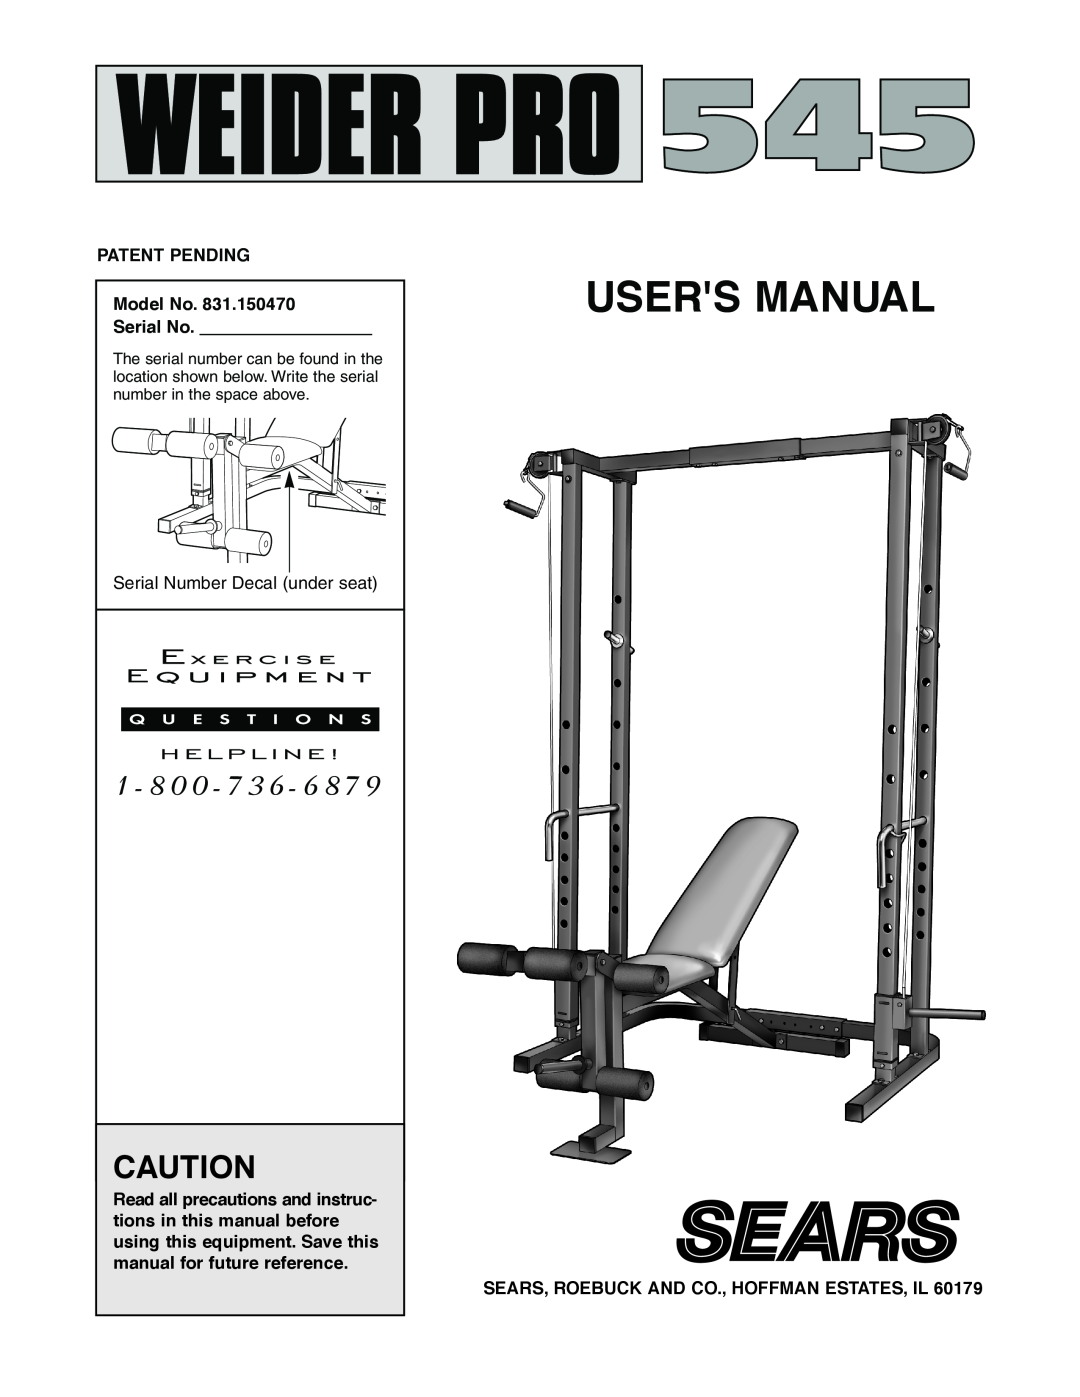 Weider 831.150470 user manual Users Manual, PATENT PENDING Model No Serial No, Sears, Roebuck And Co., Hoffman Estates, Il 